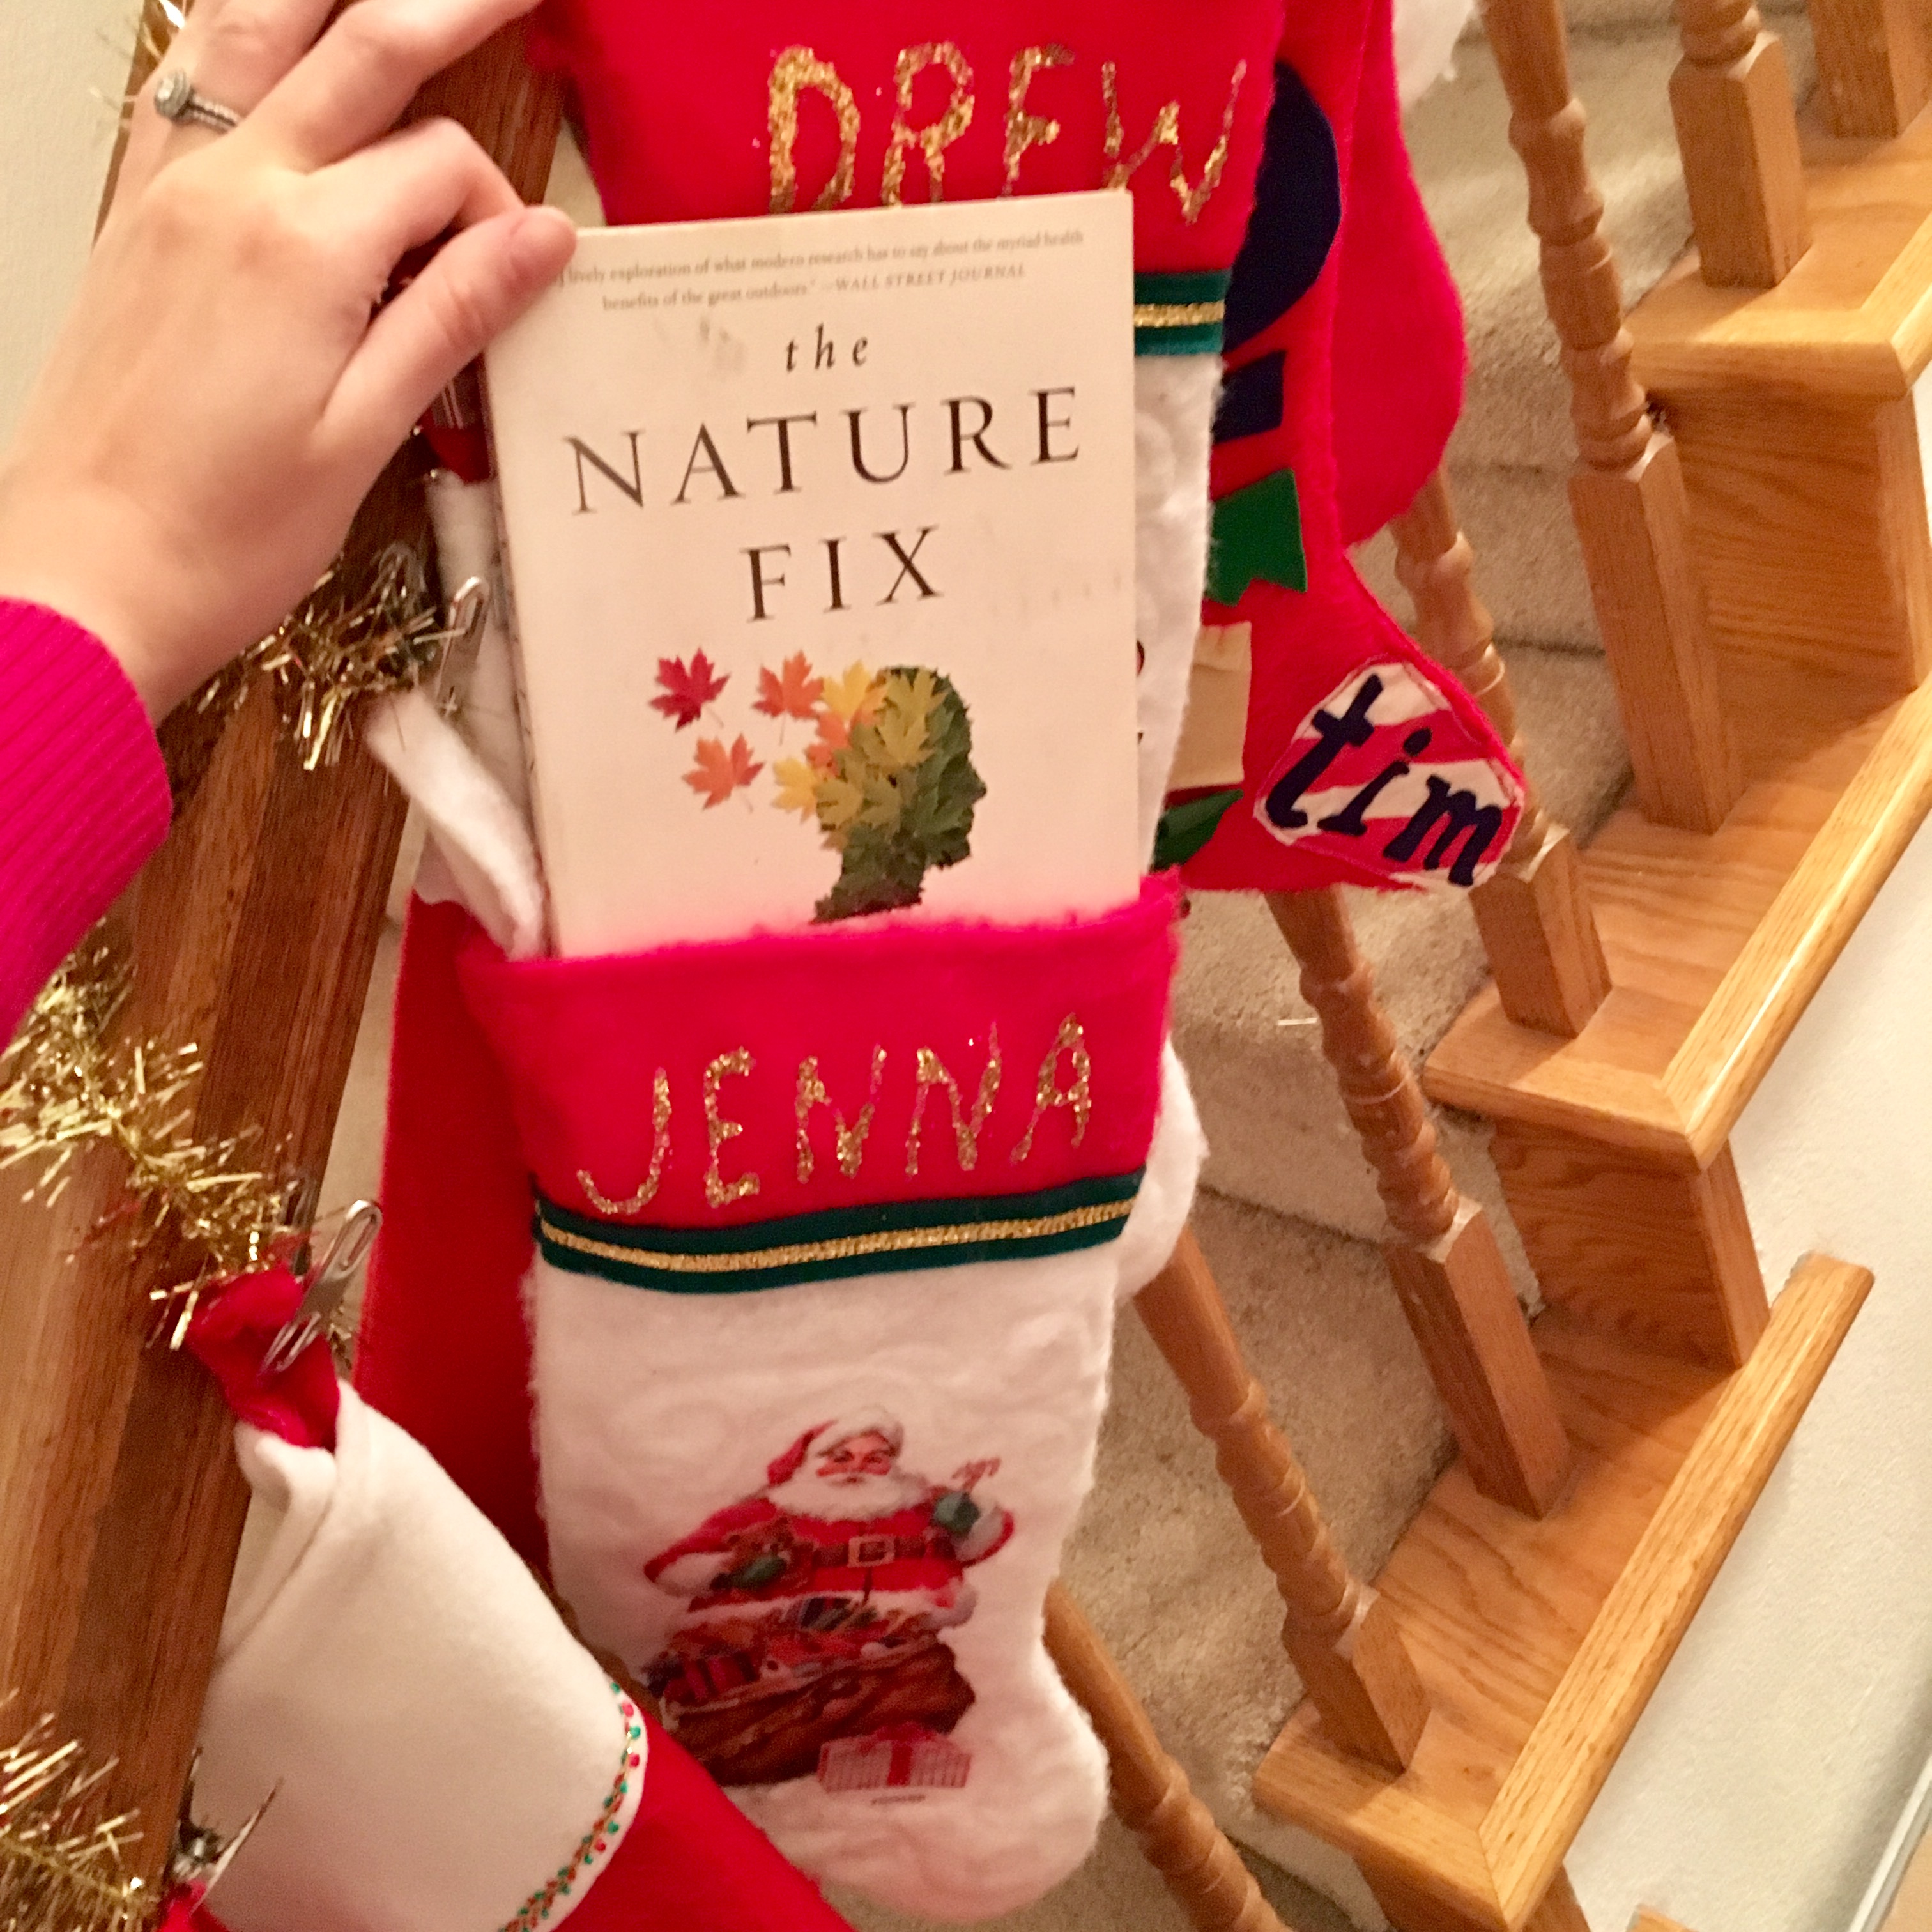 Hand lifting The Nature Fix paperback book out of a Christmas stocking